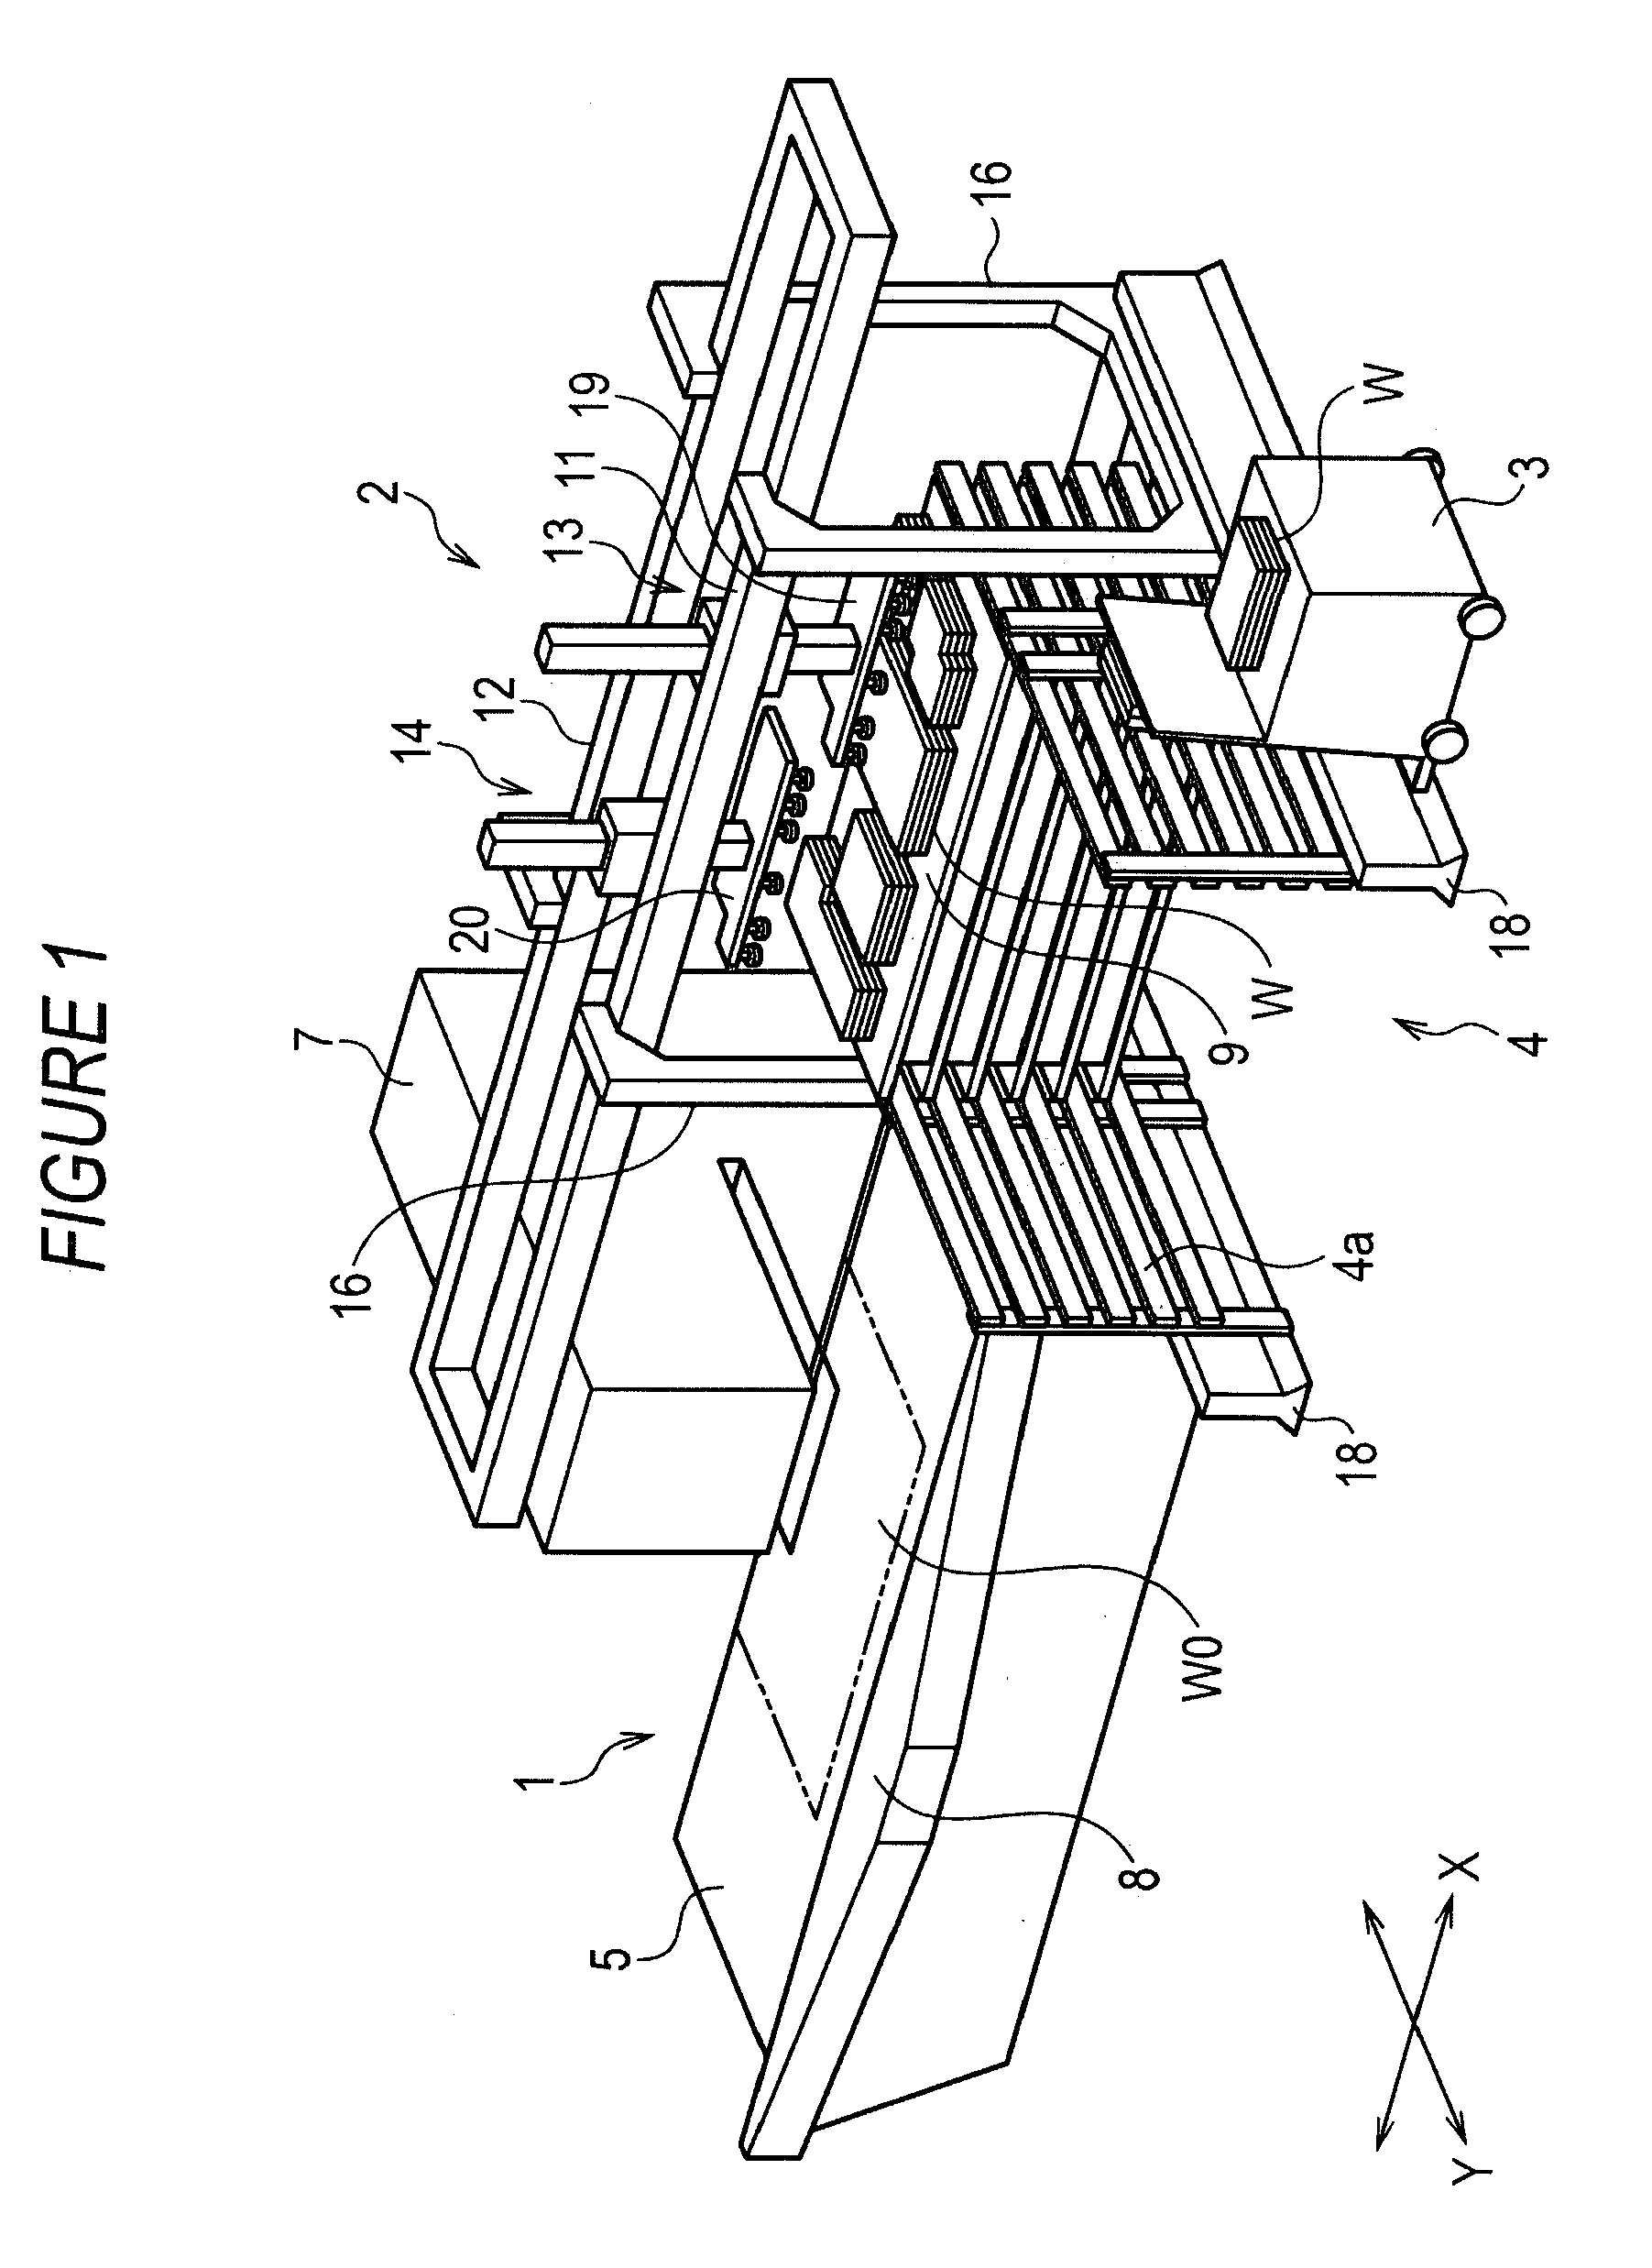 Plate material conveying device